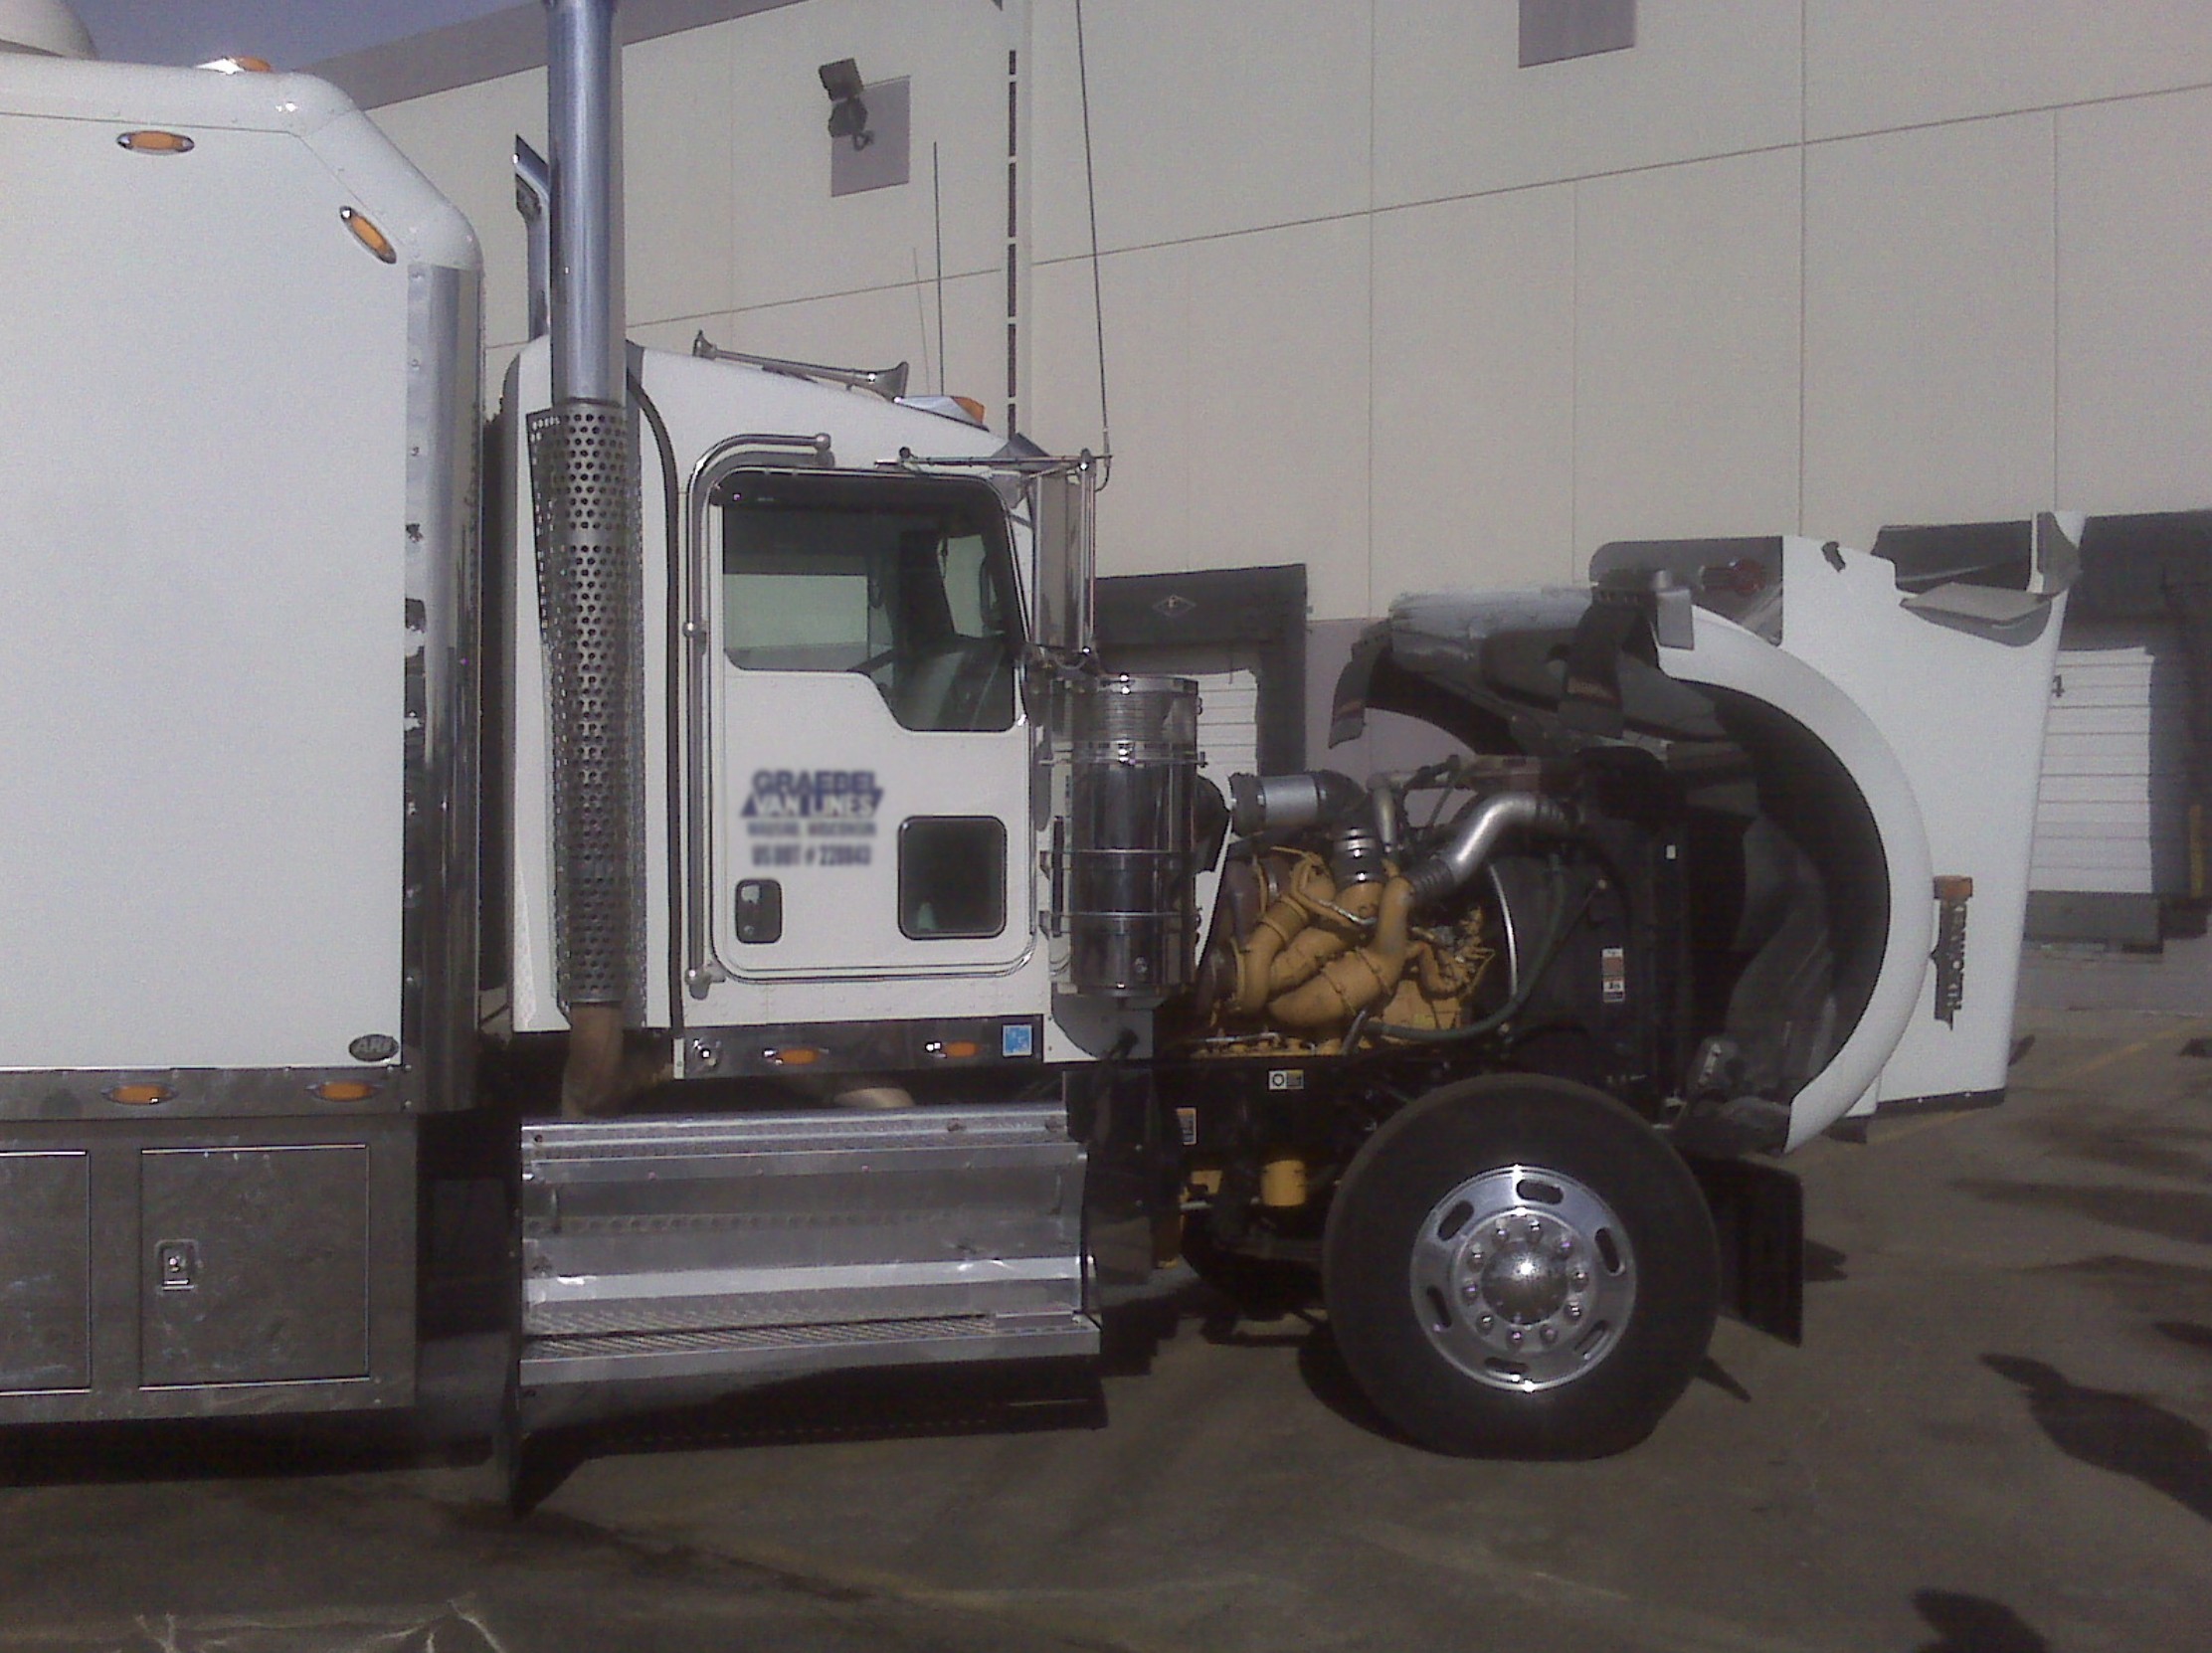 this image shows mobile truck engine repair services in Brownsville, TX